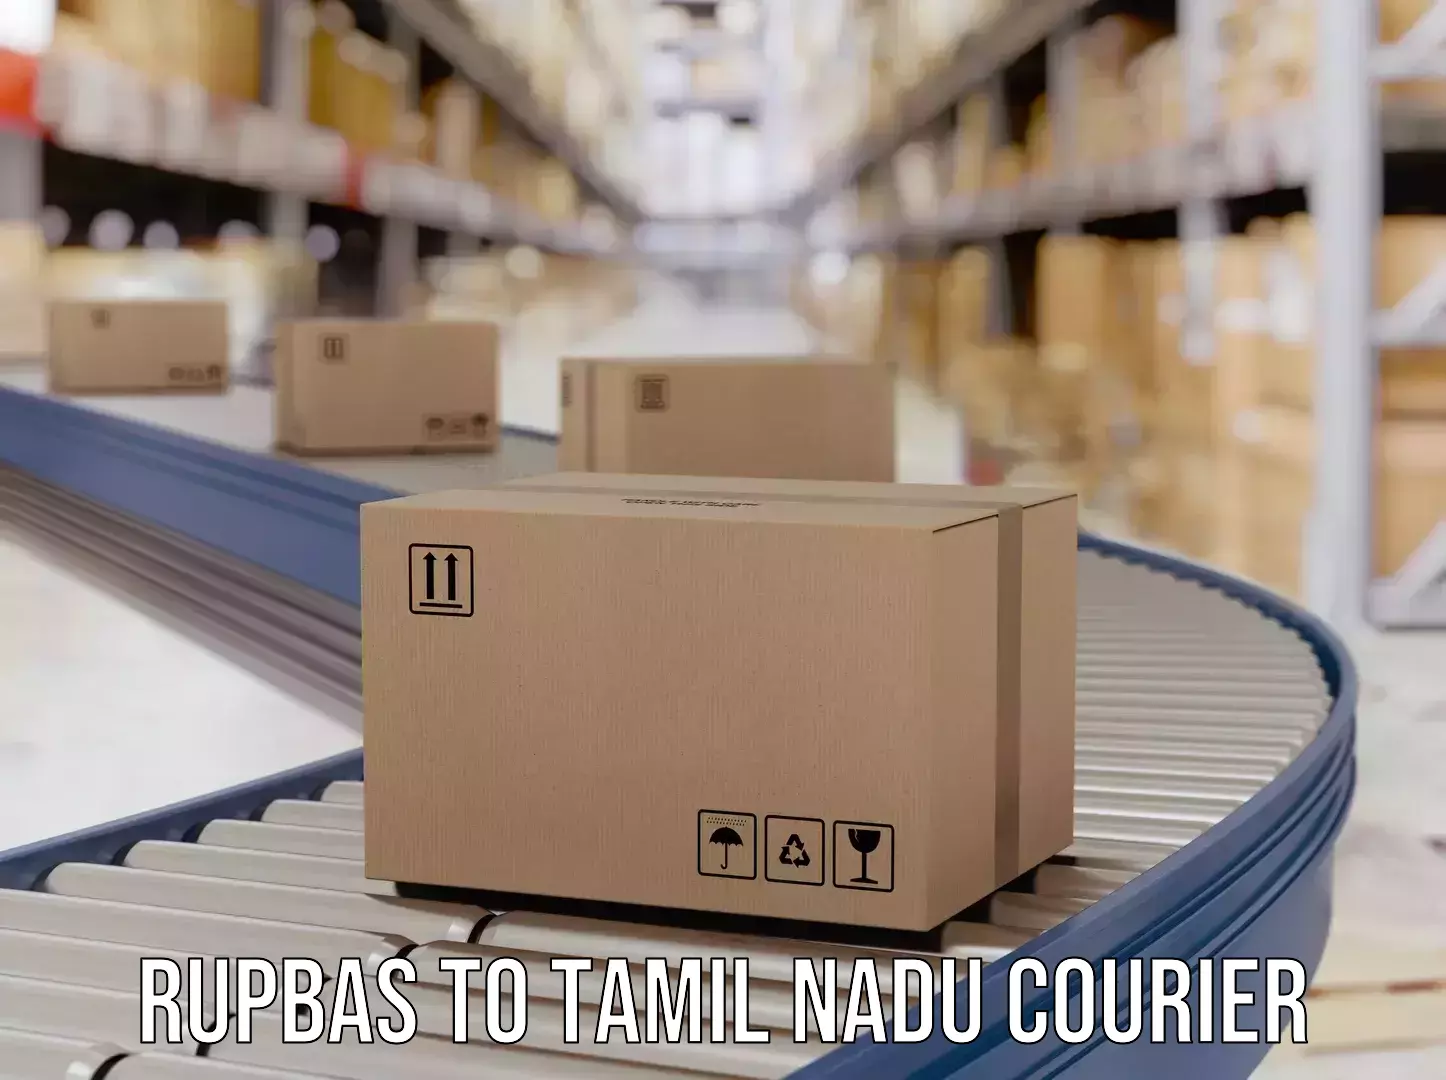 On-call courier service Rupbas to Ennore Port Chennai